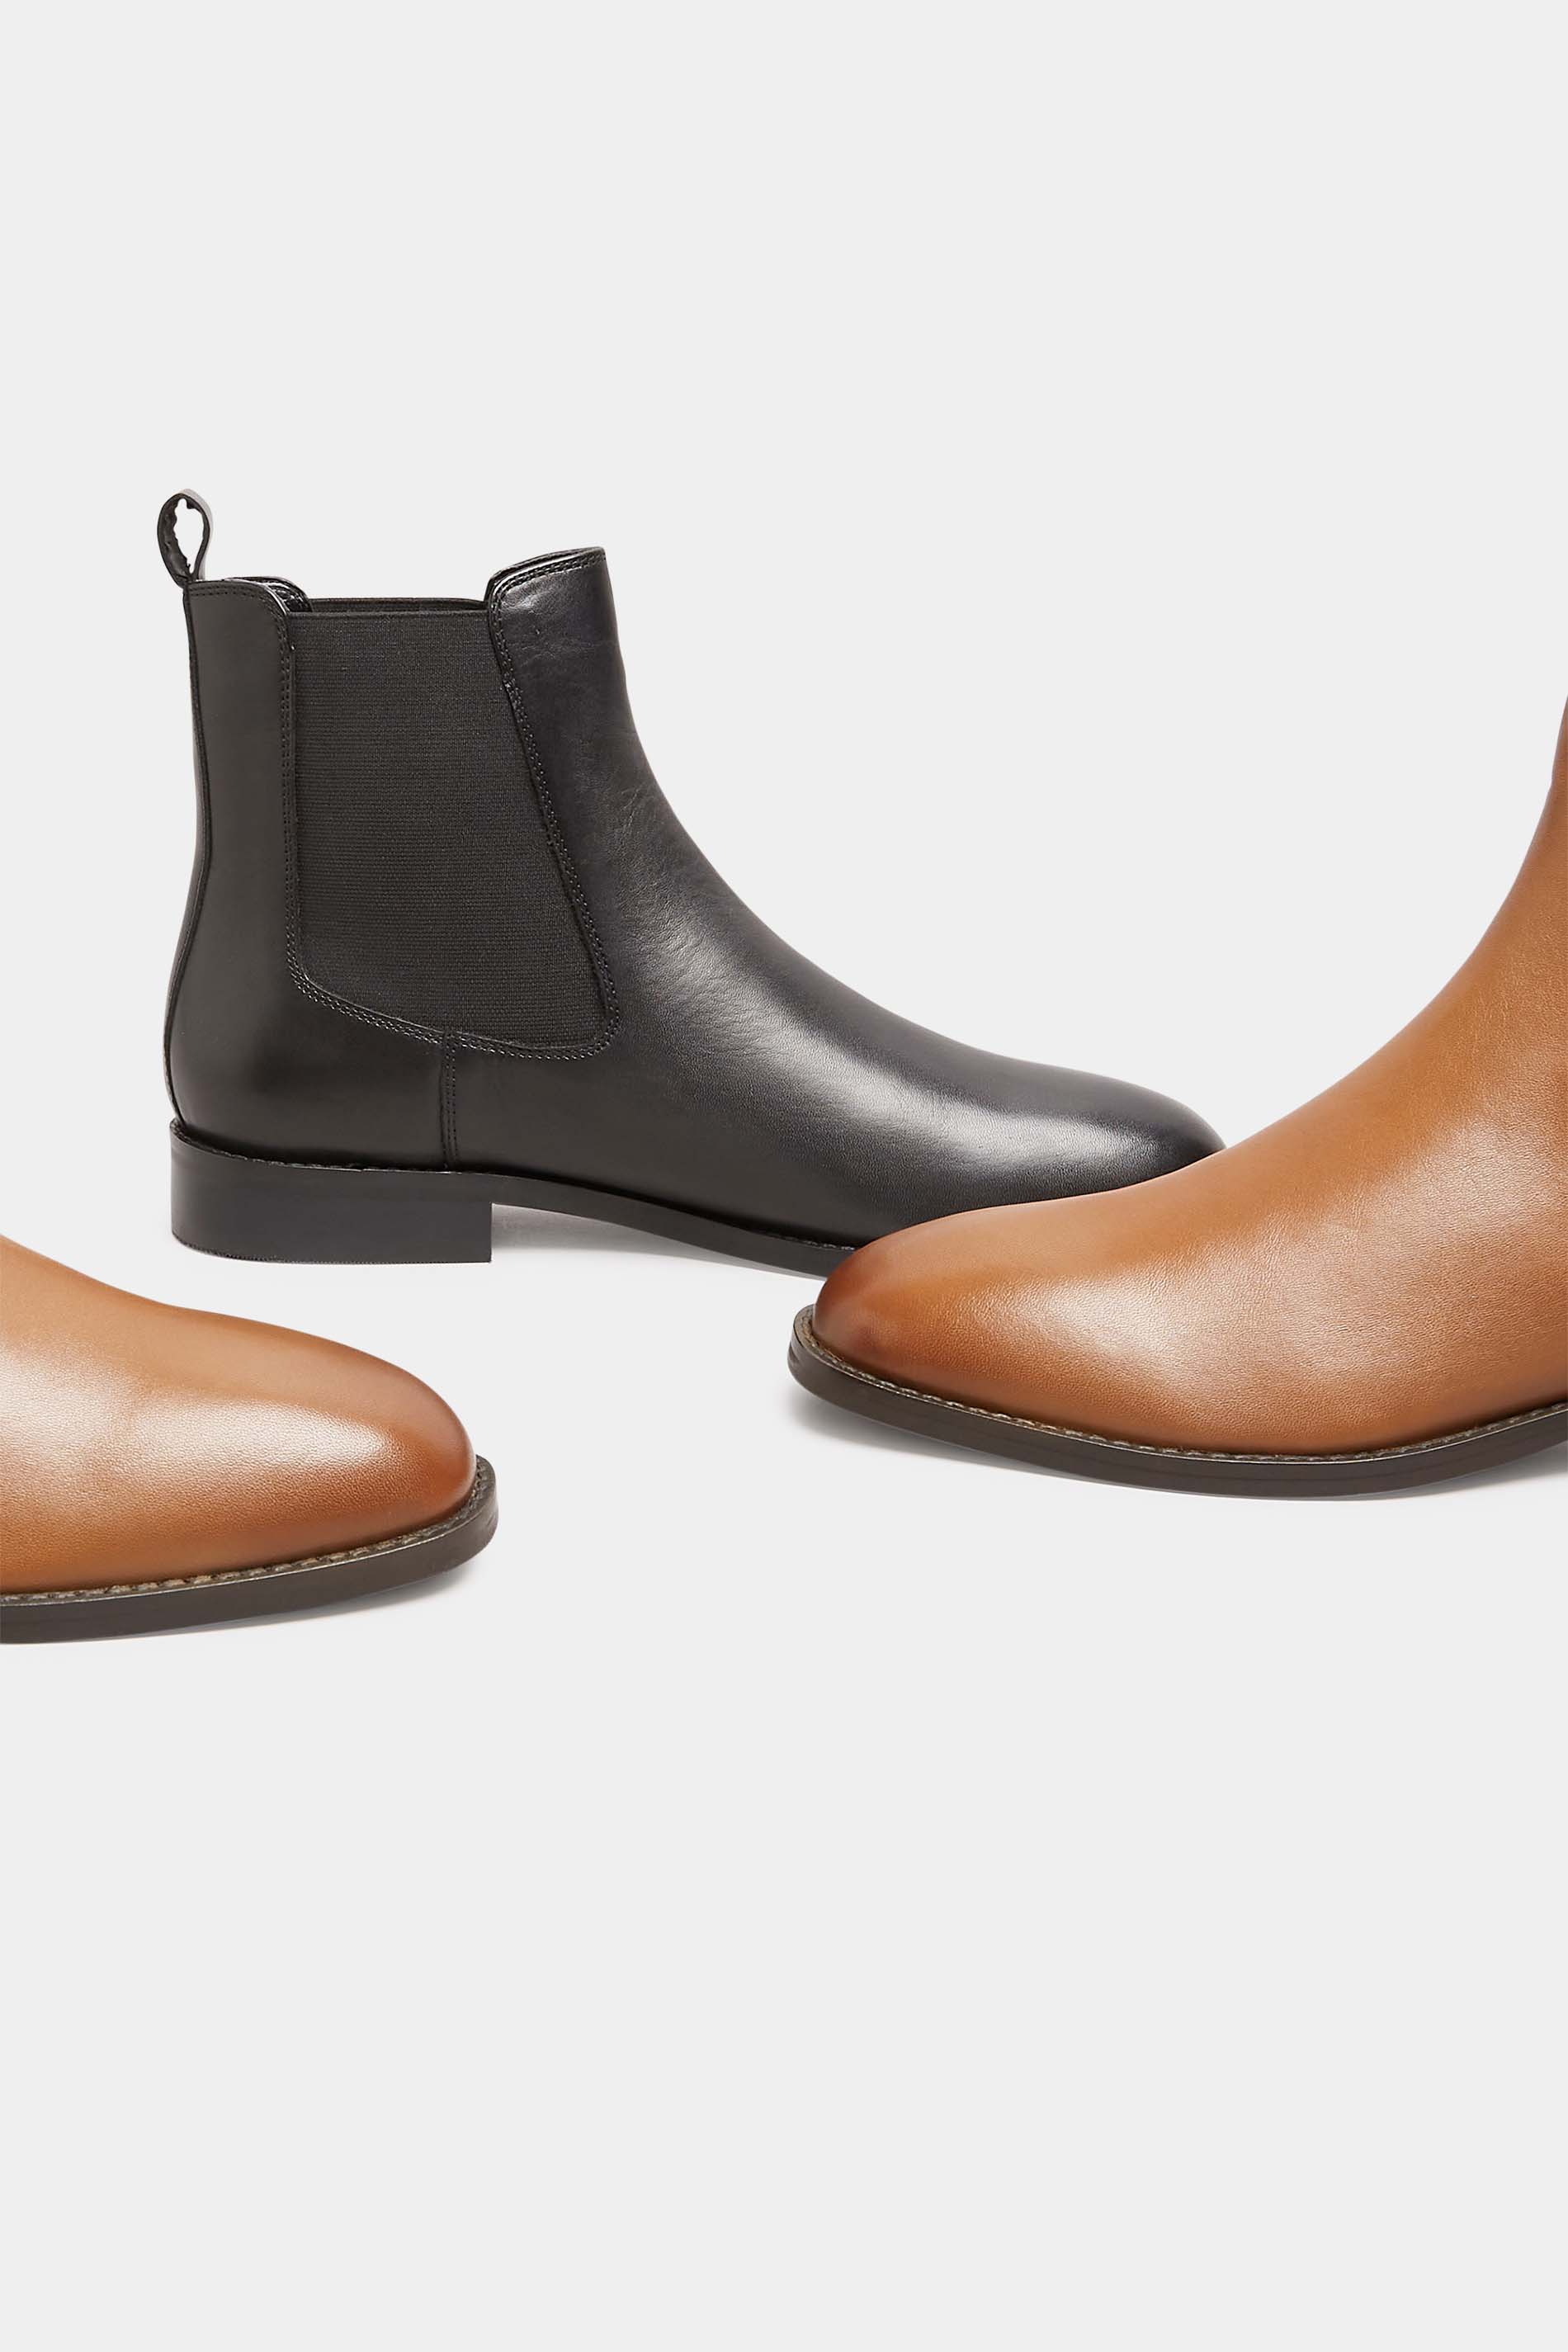 Black Leather Chelsea Boots In Standard Fit | Long Tall Sally